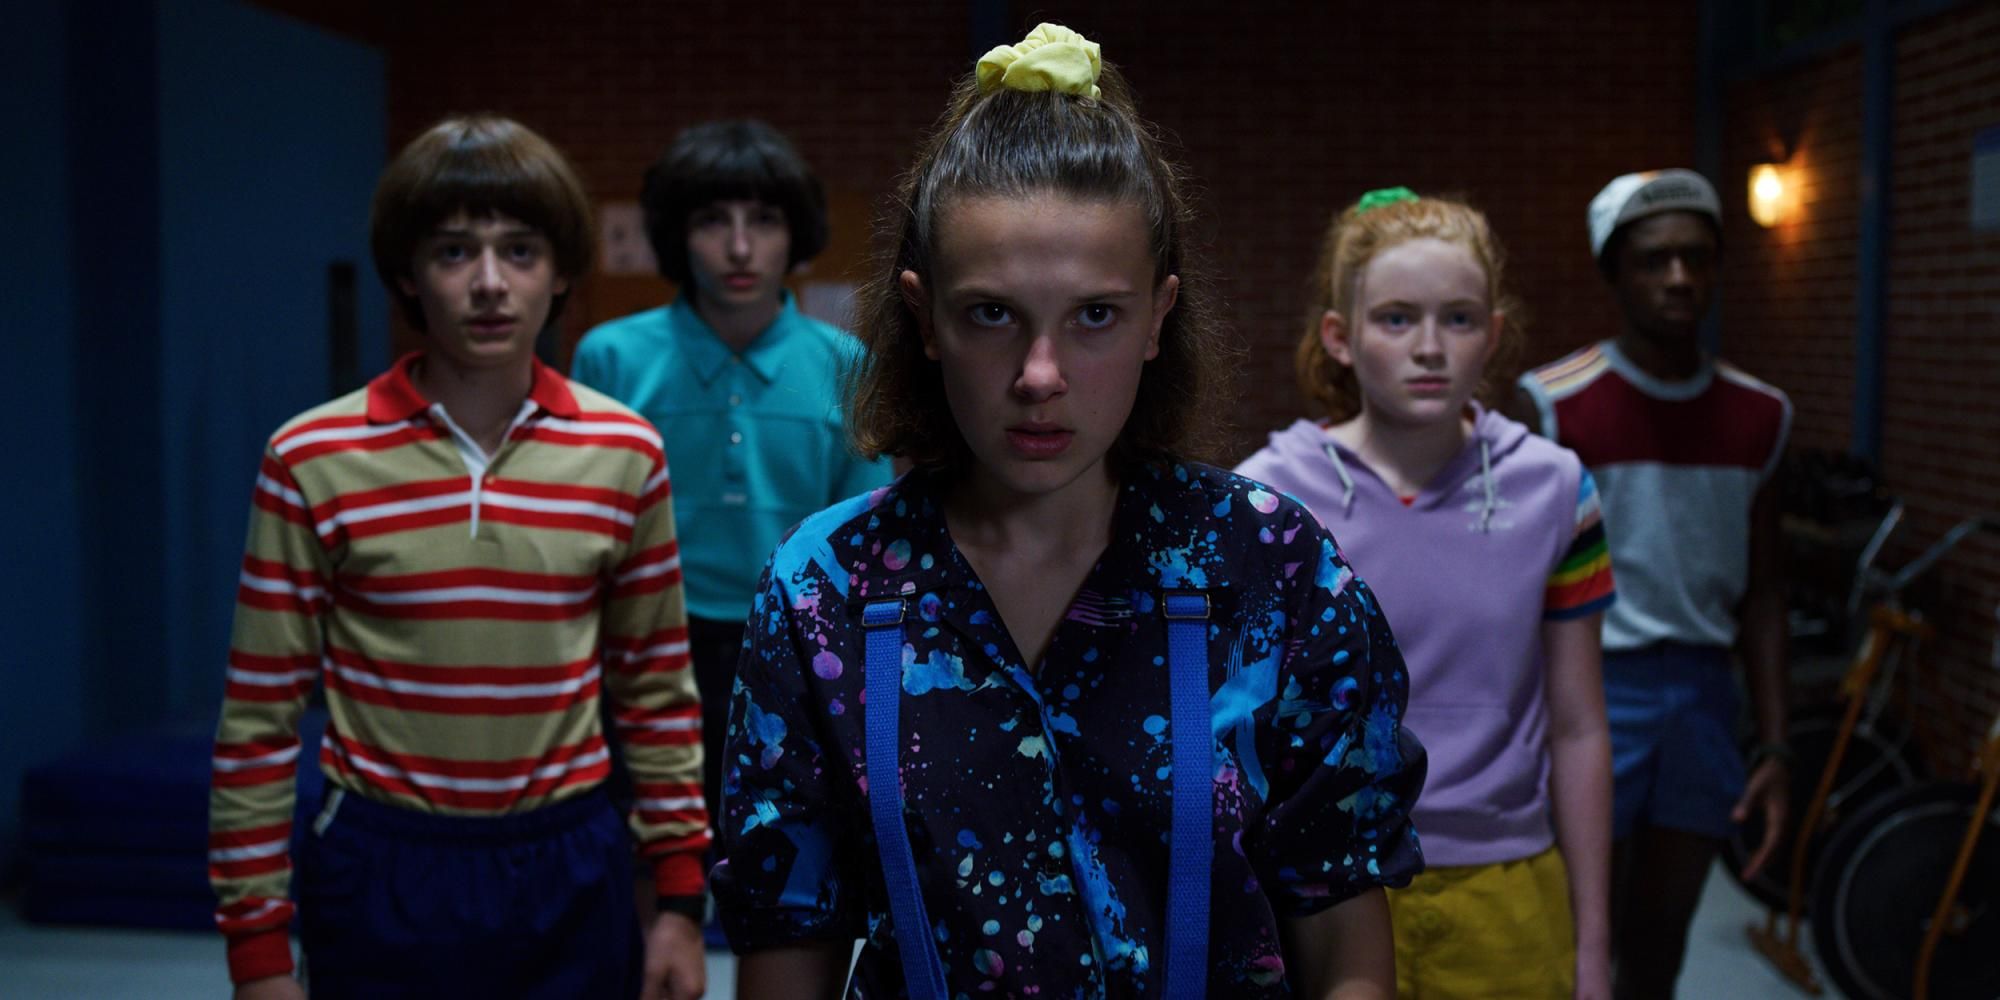 Stranger Things season 5 will see one main character's storyline